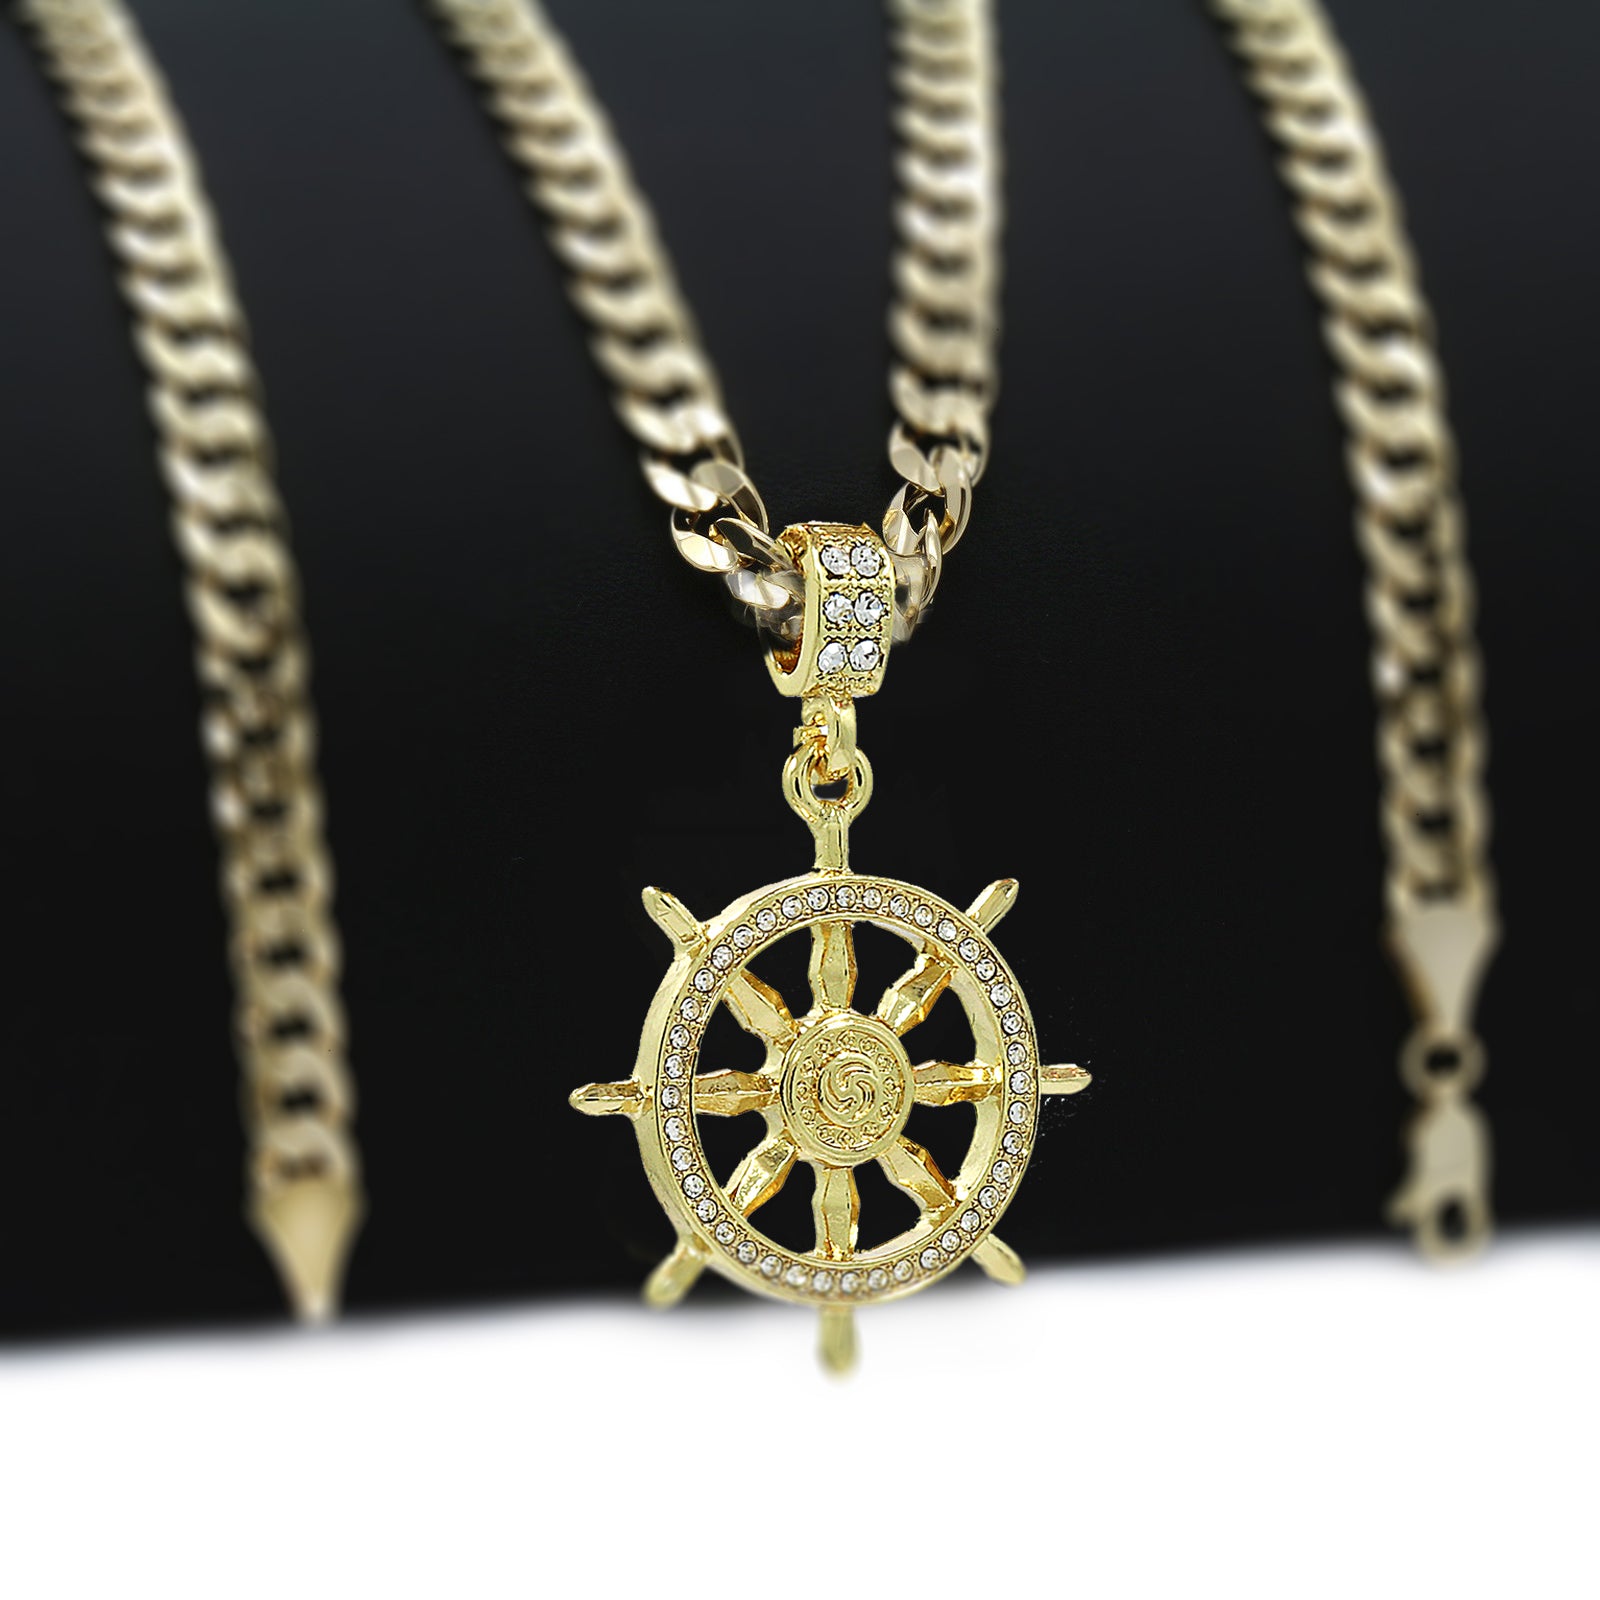 The Wheel Necklace